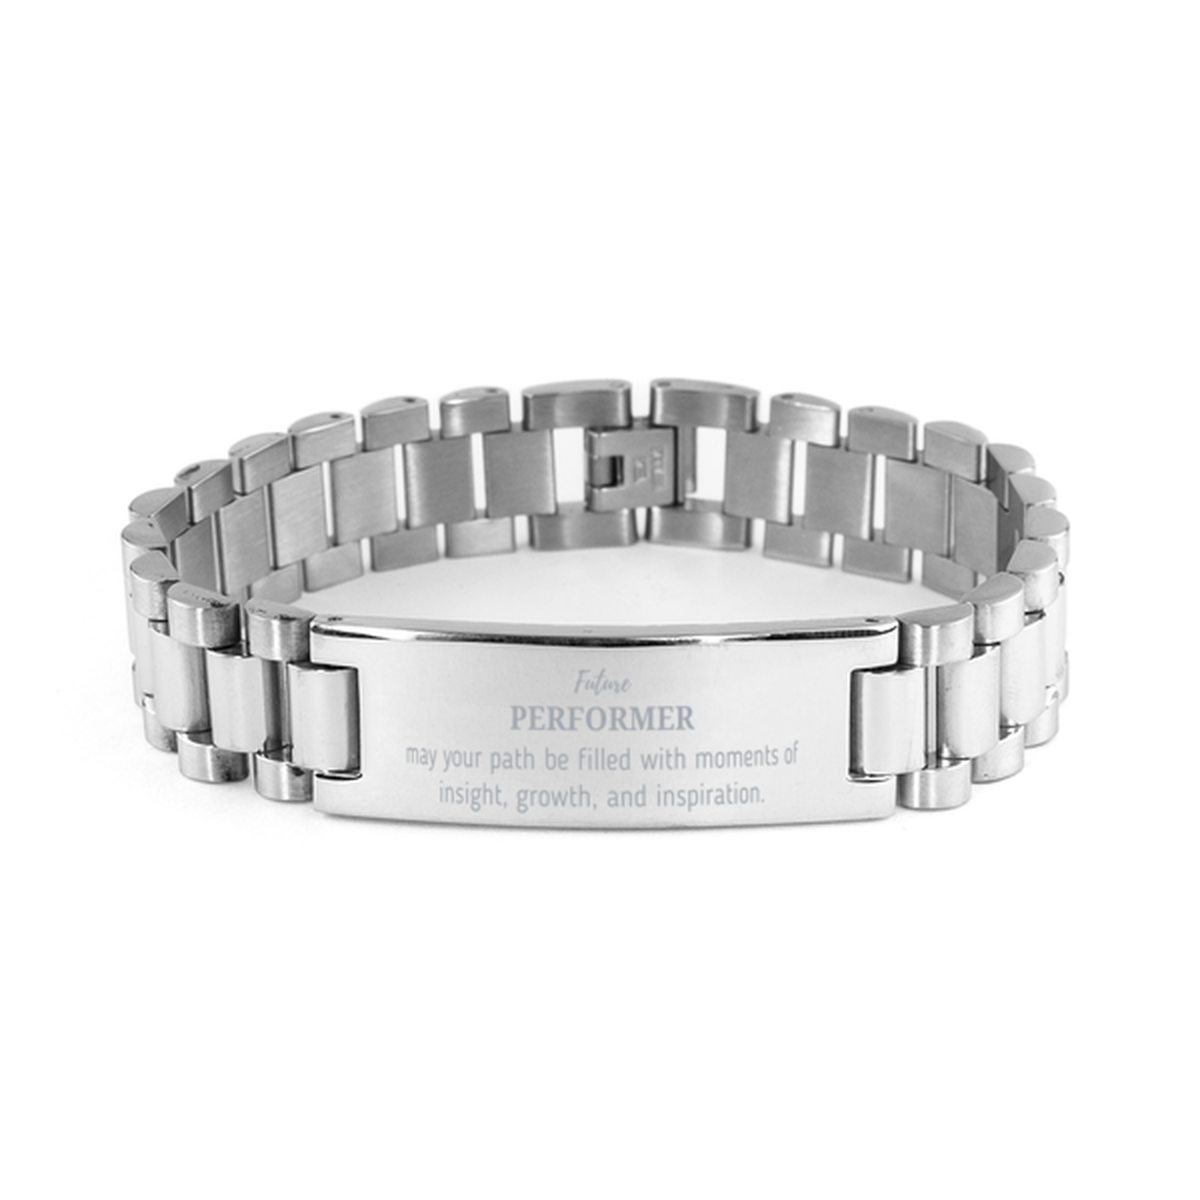 Future Performer Gifts, May your path be filled with moments of insight, Graduation Gifts for New Performer, Christmas Unique Ladder Stainless Steel Bracelet For Men, Women, Friends